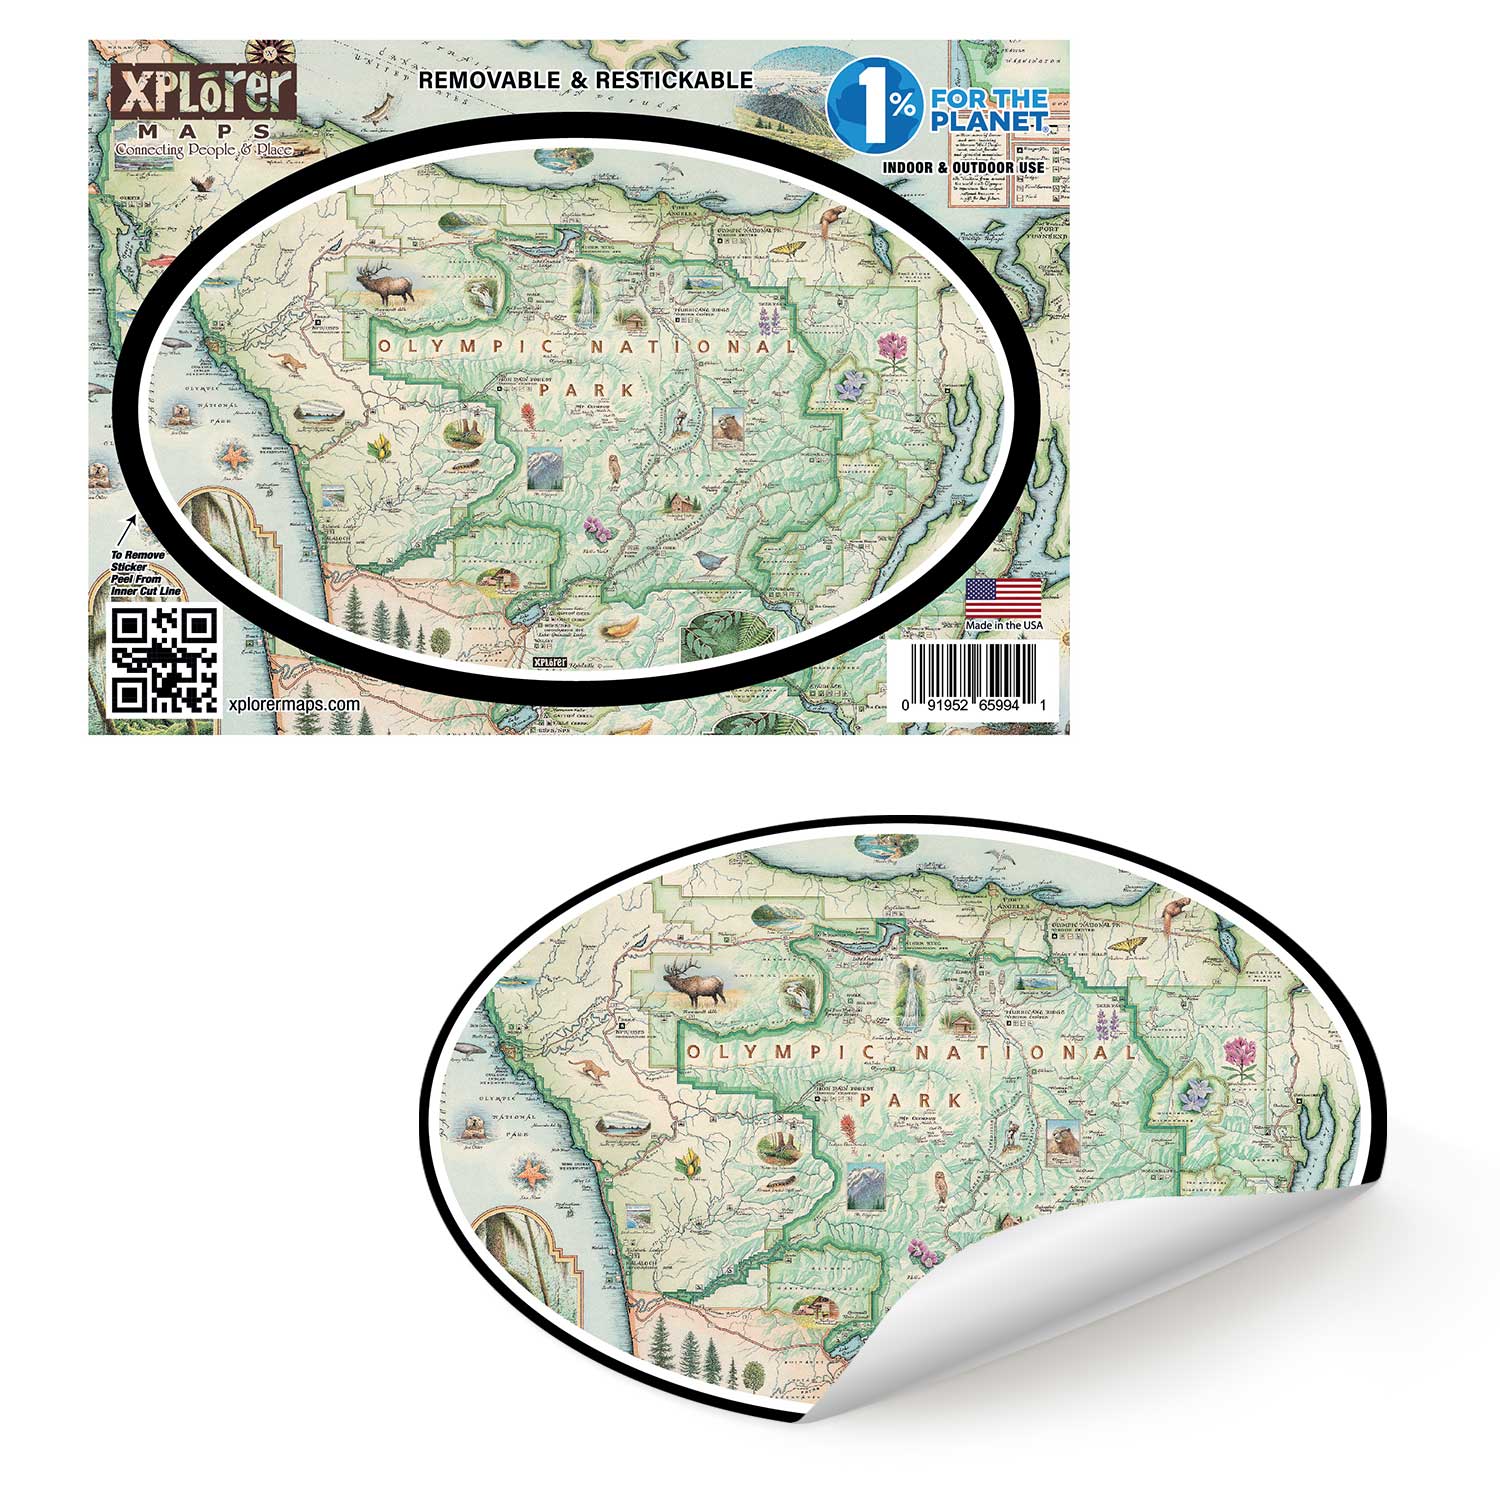 Olympic National Park Maps Sticker by Xplorer Maps.  The map features illustrations of the park such as Enchanted Valley Chalet, Sol Duc Hot Springs Resort, Hurricane Ridge Visitor Center, and Kalaloch Lodge. Flora and fauna include sea otters, Roosevelt elk, Chinook salmon, skunk cabbage, and Flett's Violet.